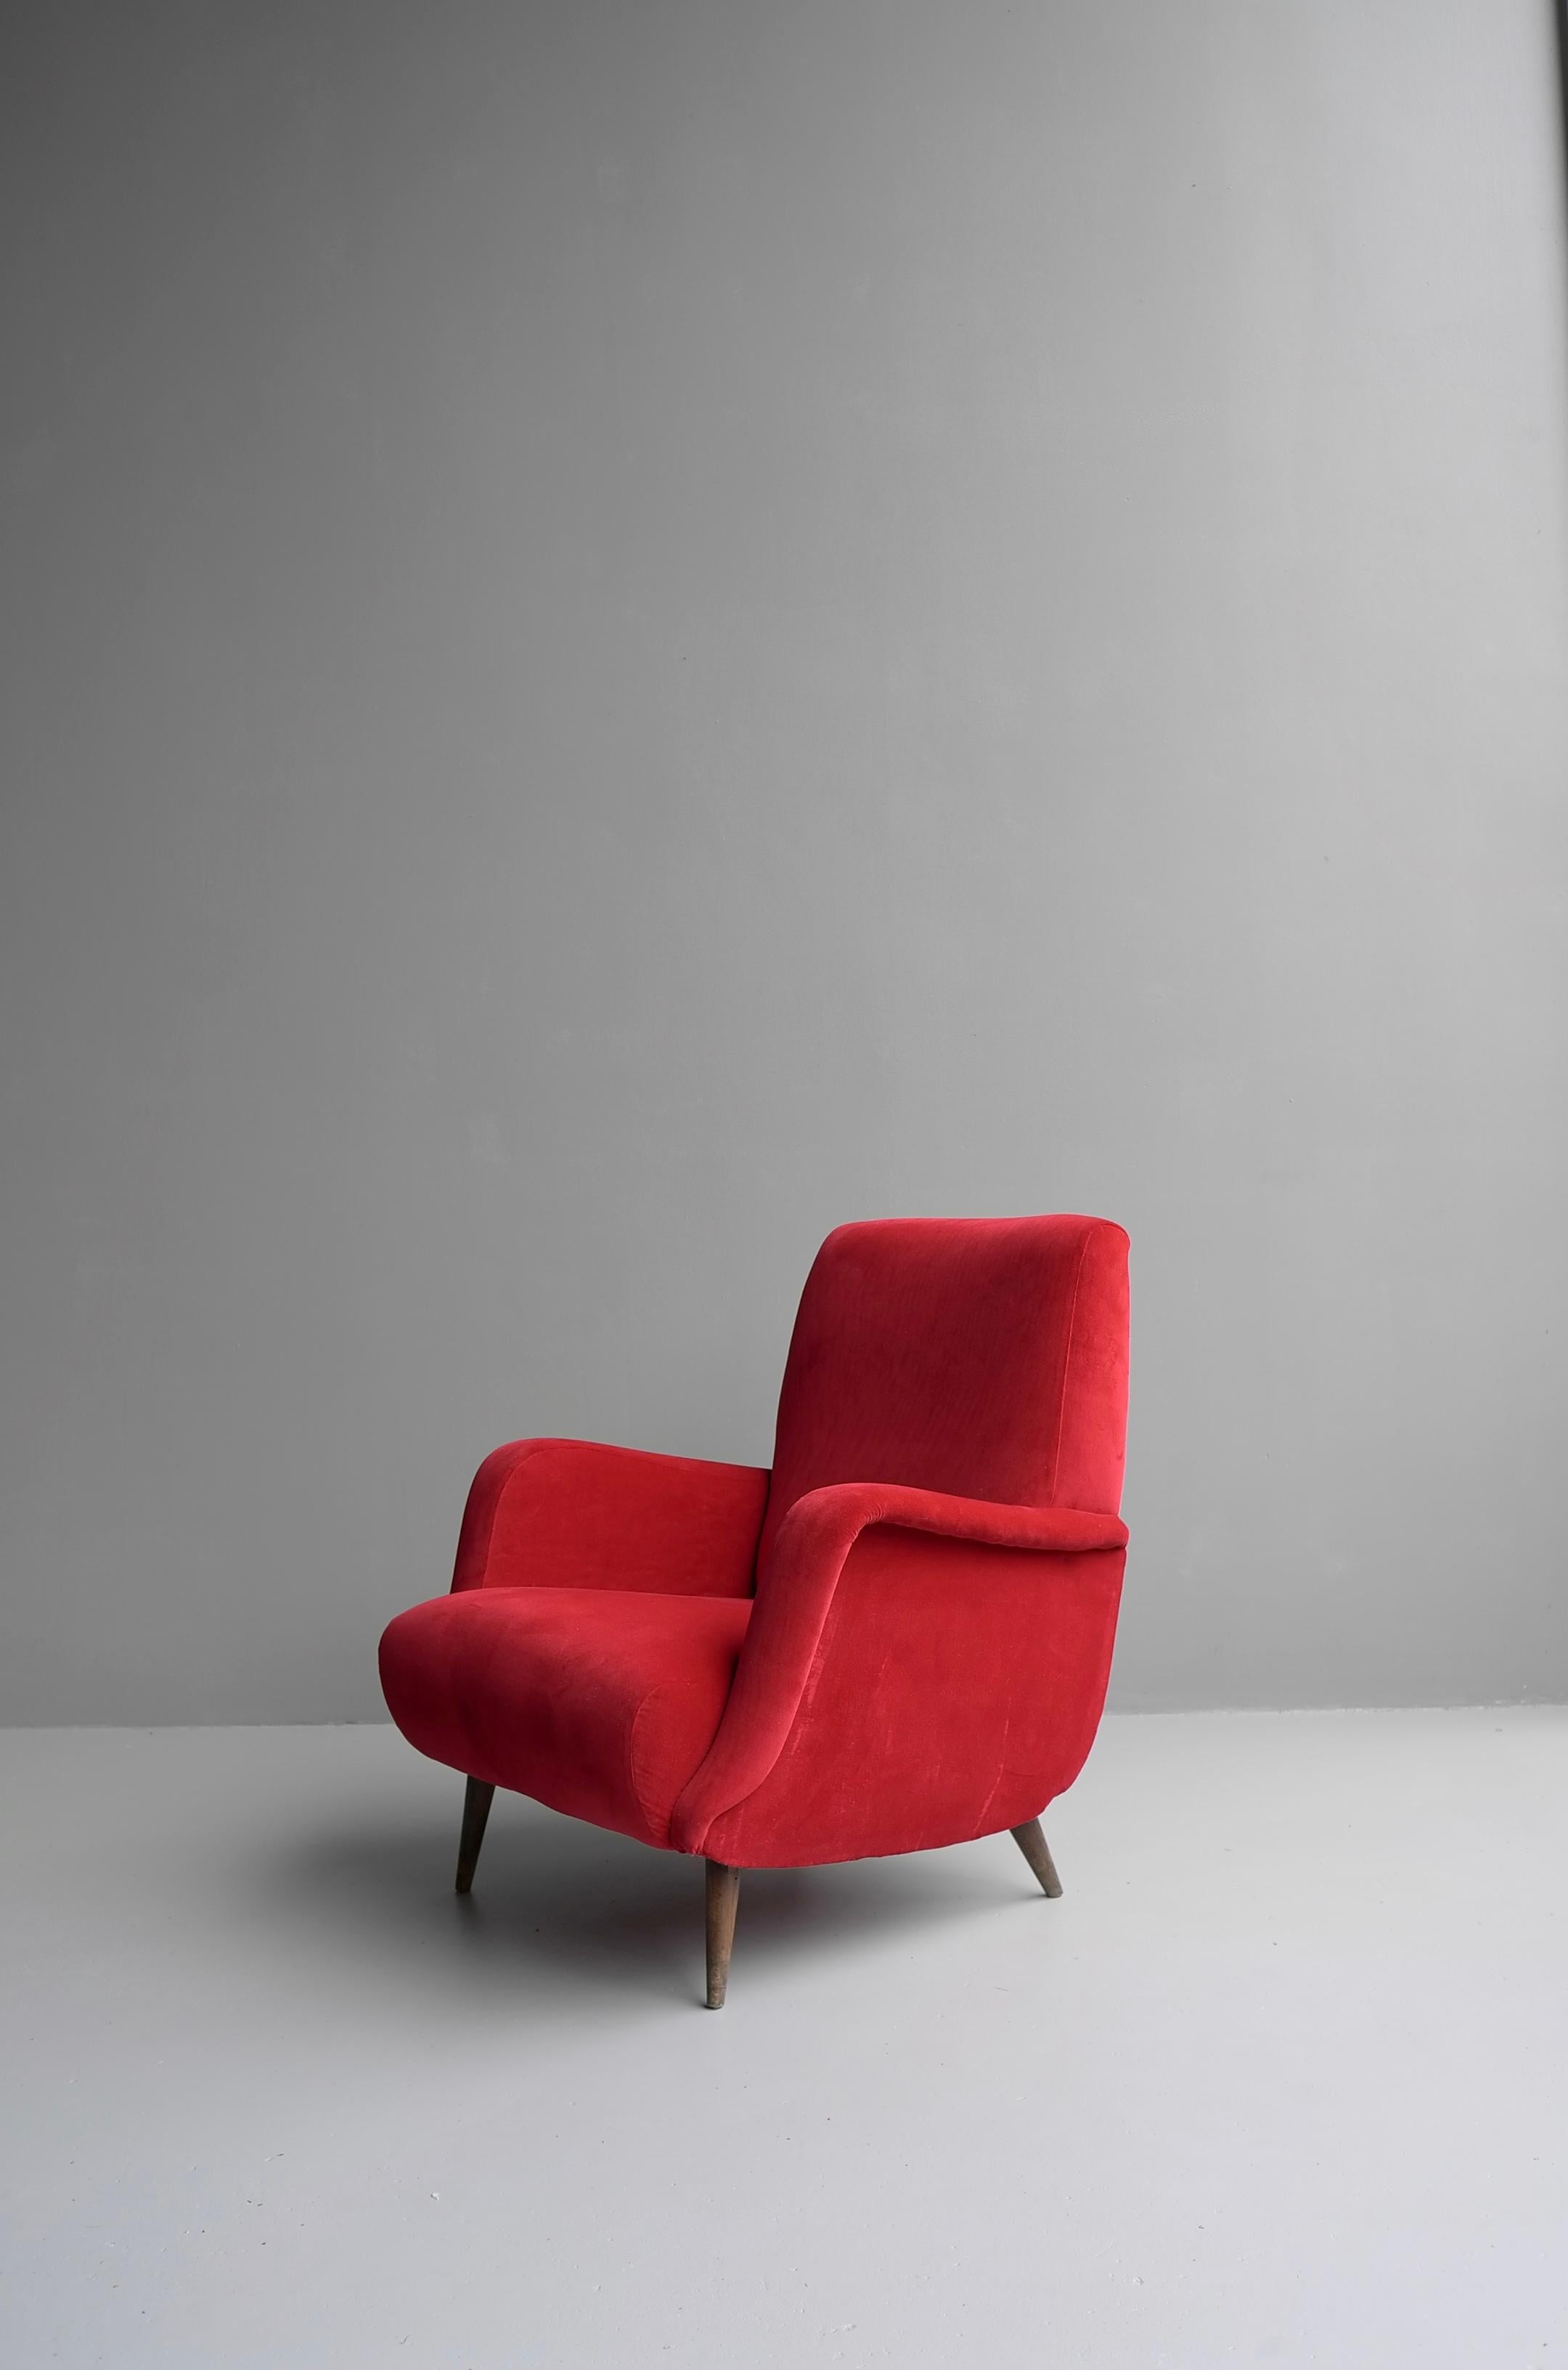 Carlo de Carli red armchair model 806 by Cassina, Italy 1955.
It is recent upholstered in a velvet style fabric. The legs are made from solid walnut.